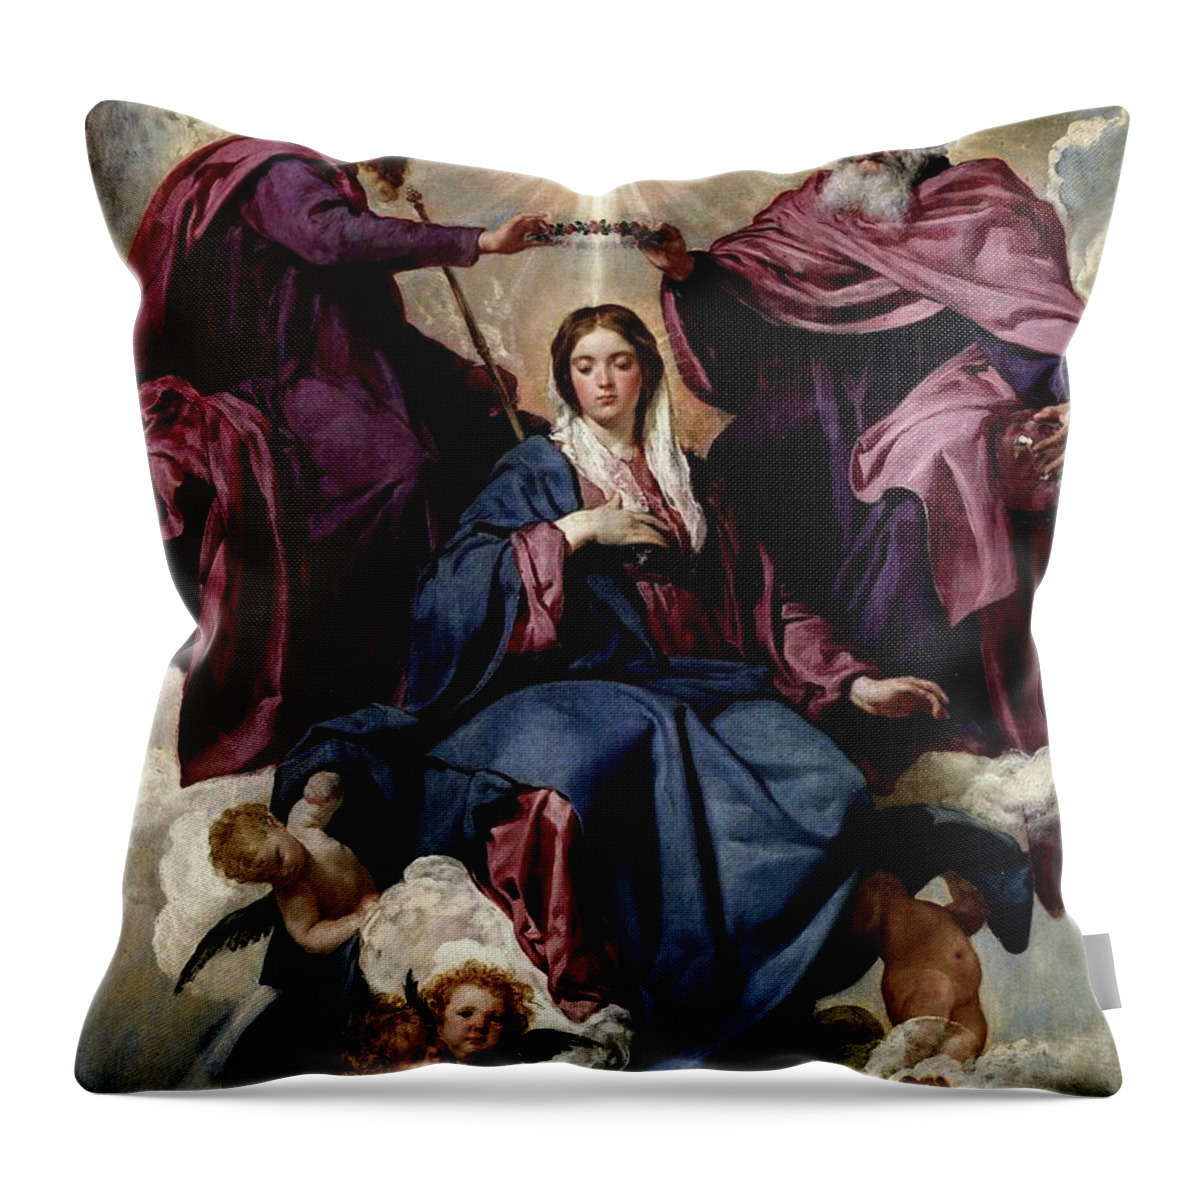 Diego Velazquez Throw Pillow featuring the painting 'The Coronation of the Virgin', ca. 1635, Spanish School, ... by Diego Velazquez -1599-1660-